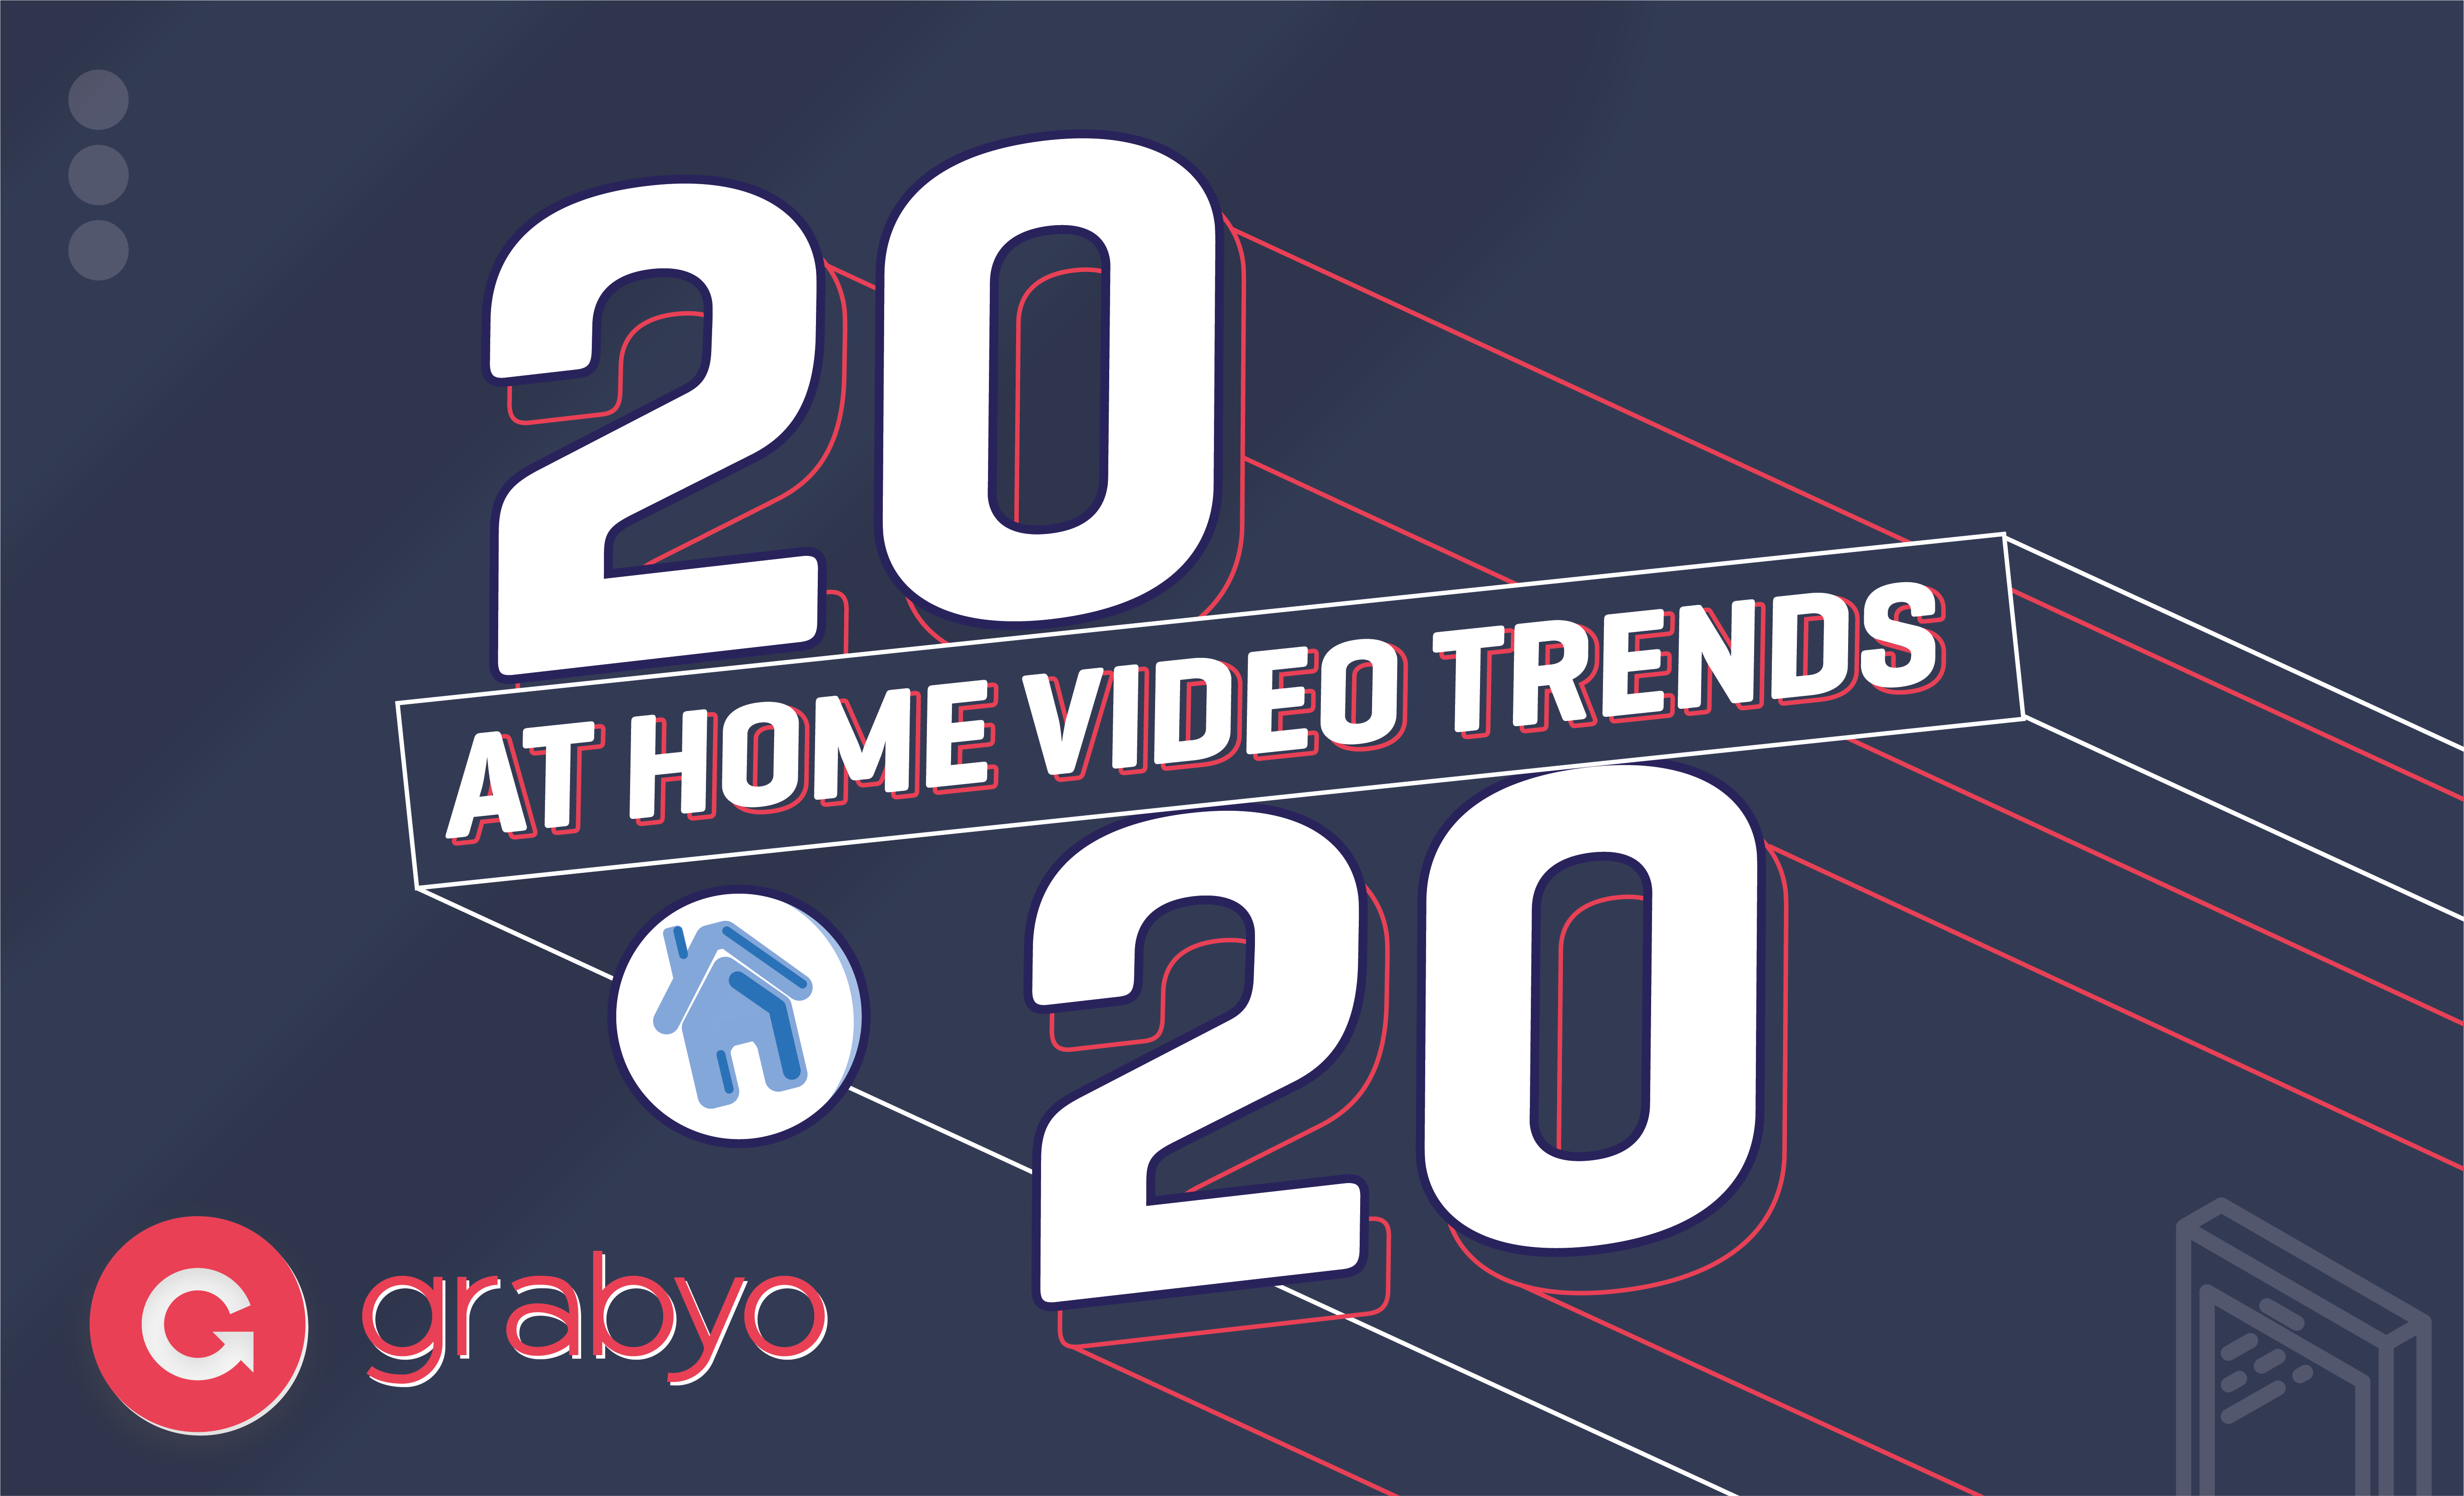 Grabyos At Home Video Trends 2020 Sports fans will switch to streaming